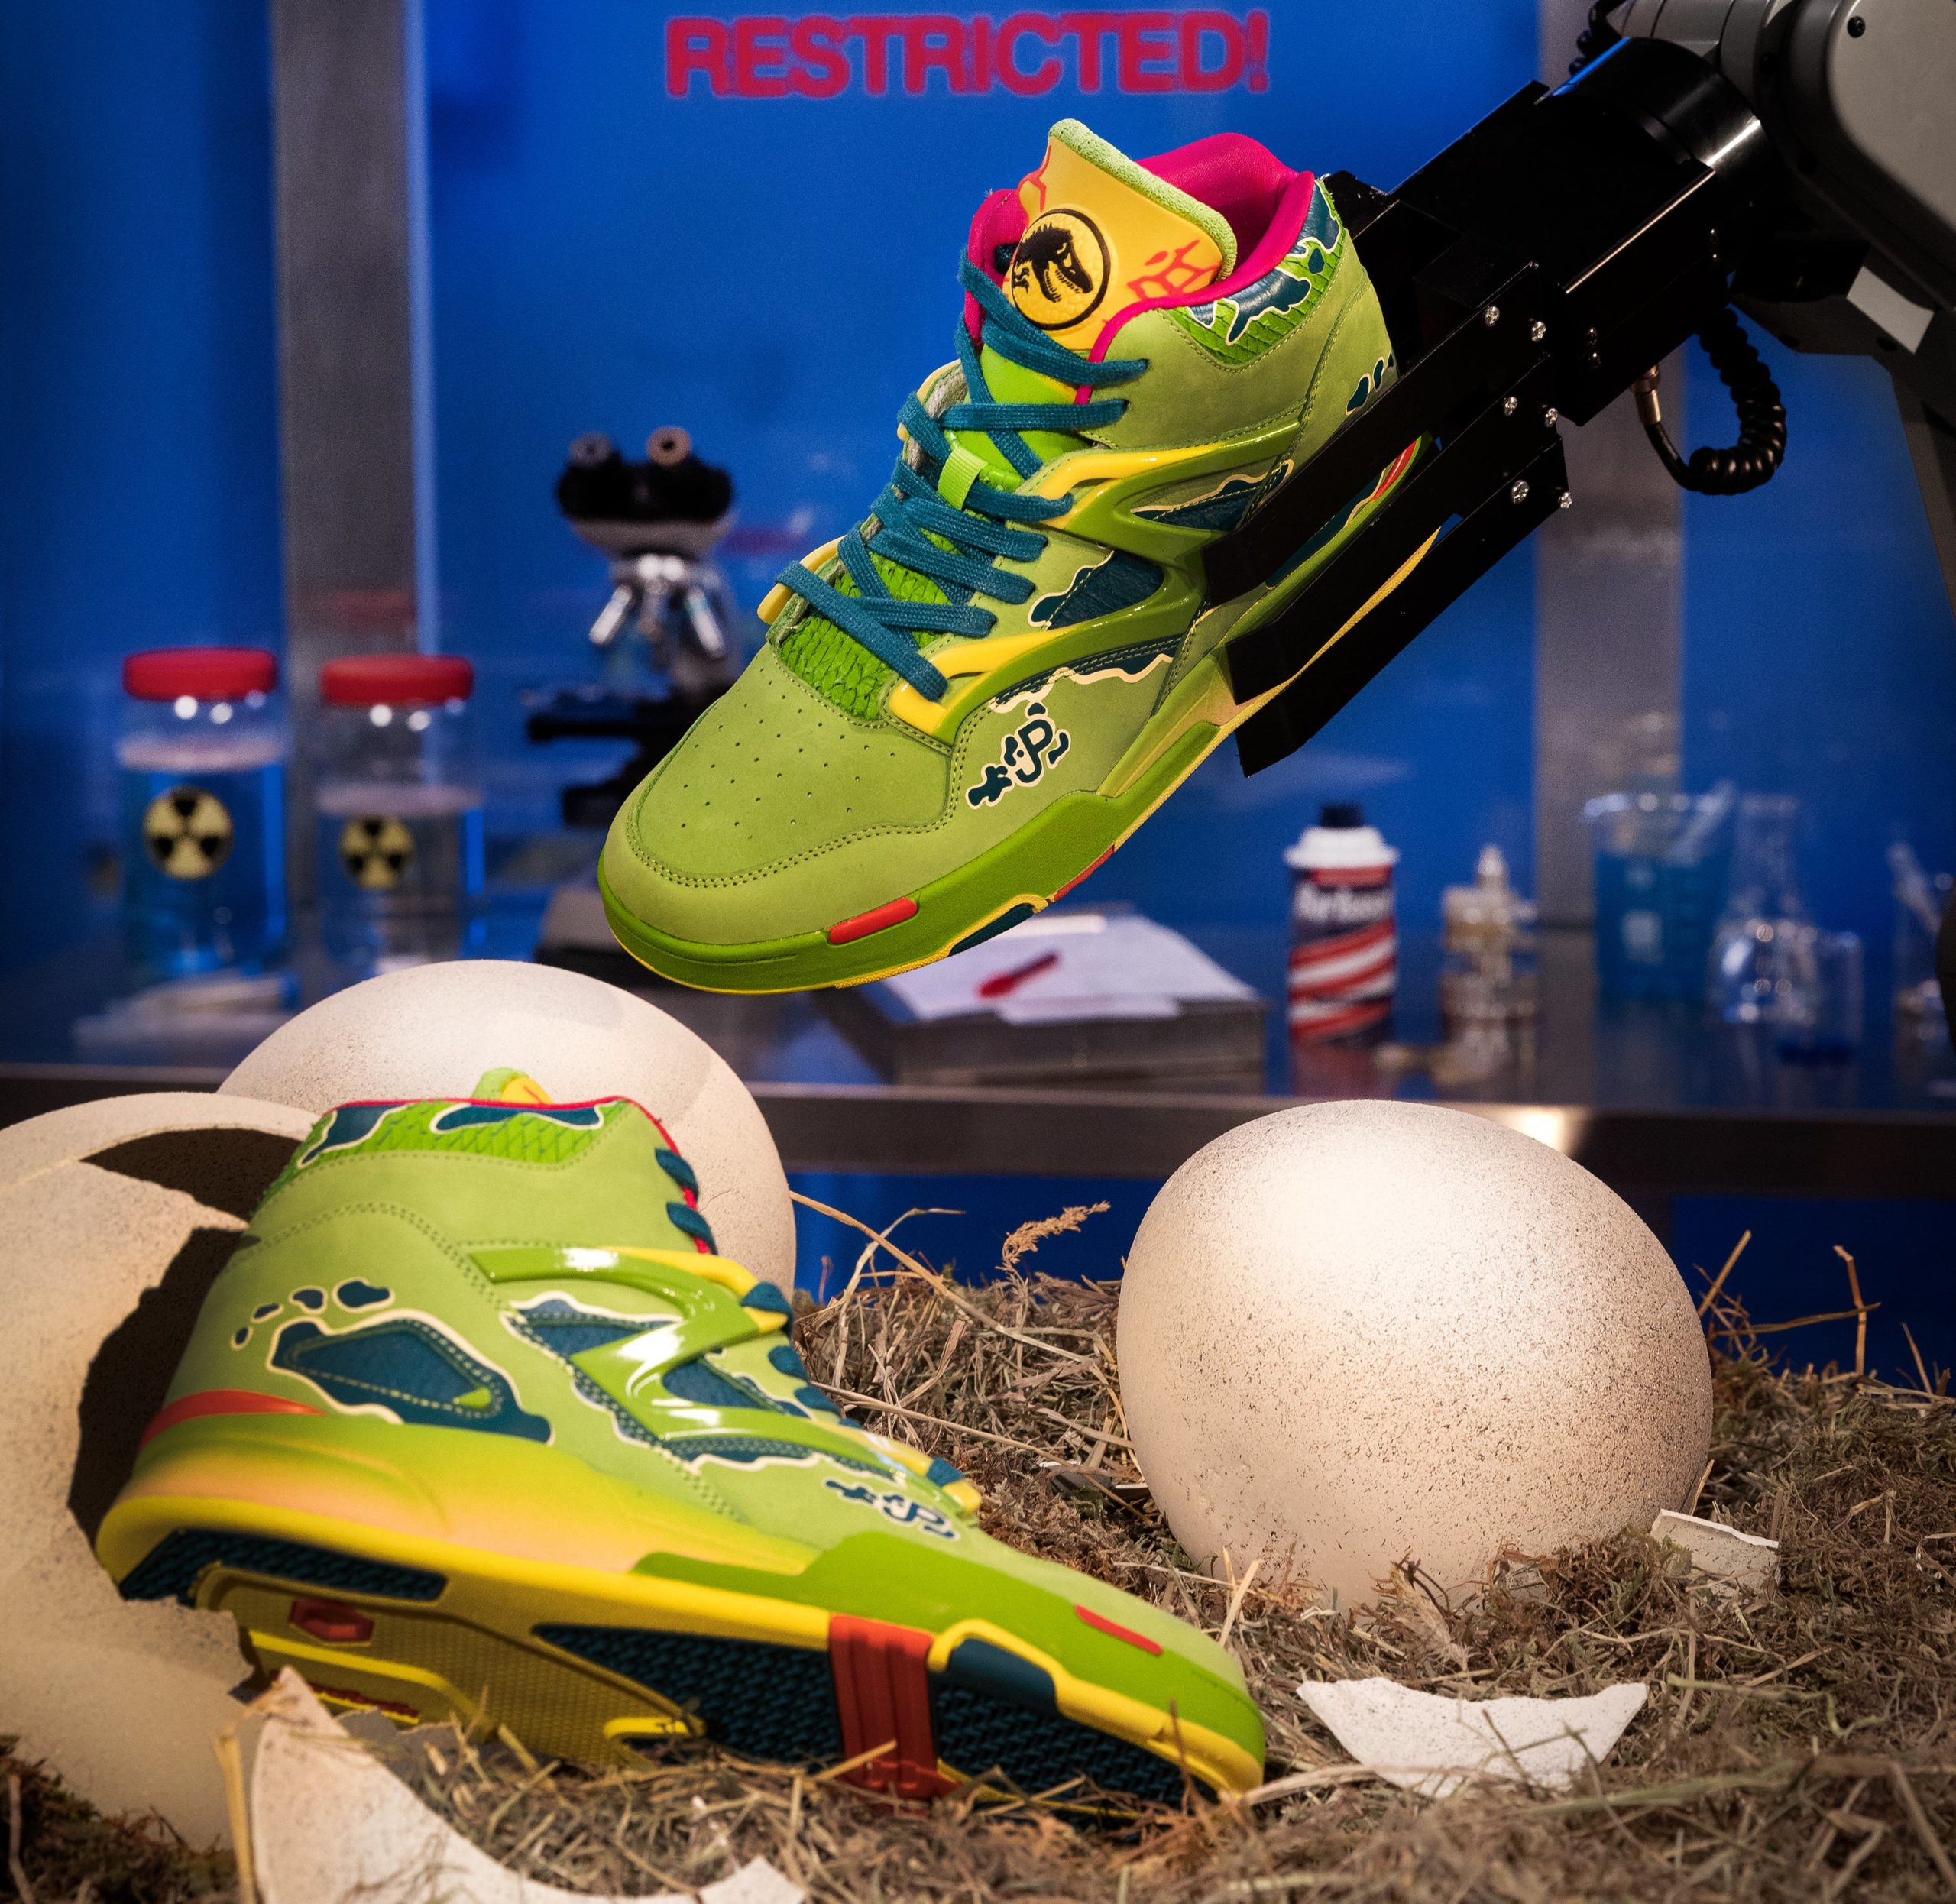 Reebok’s New Jurassic Park Collection Just Stomped All Over Your Shoe Budget